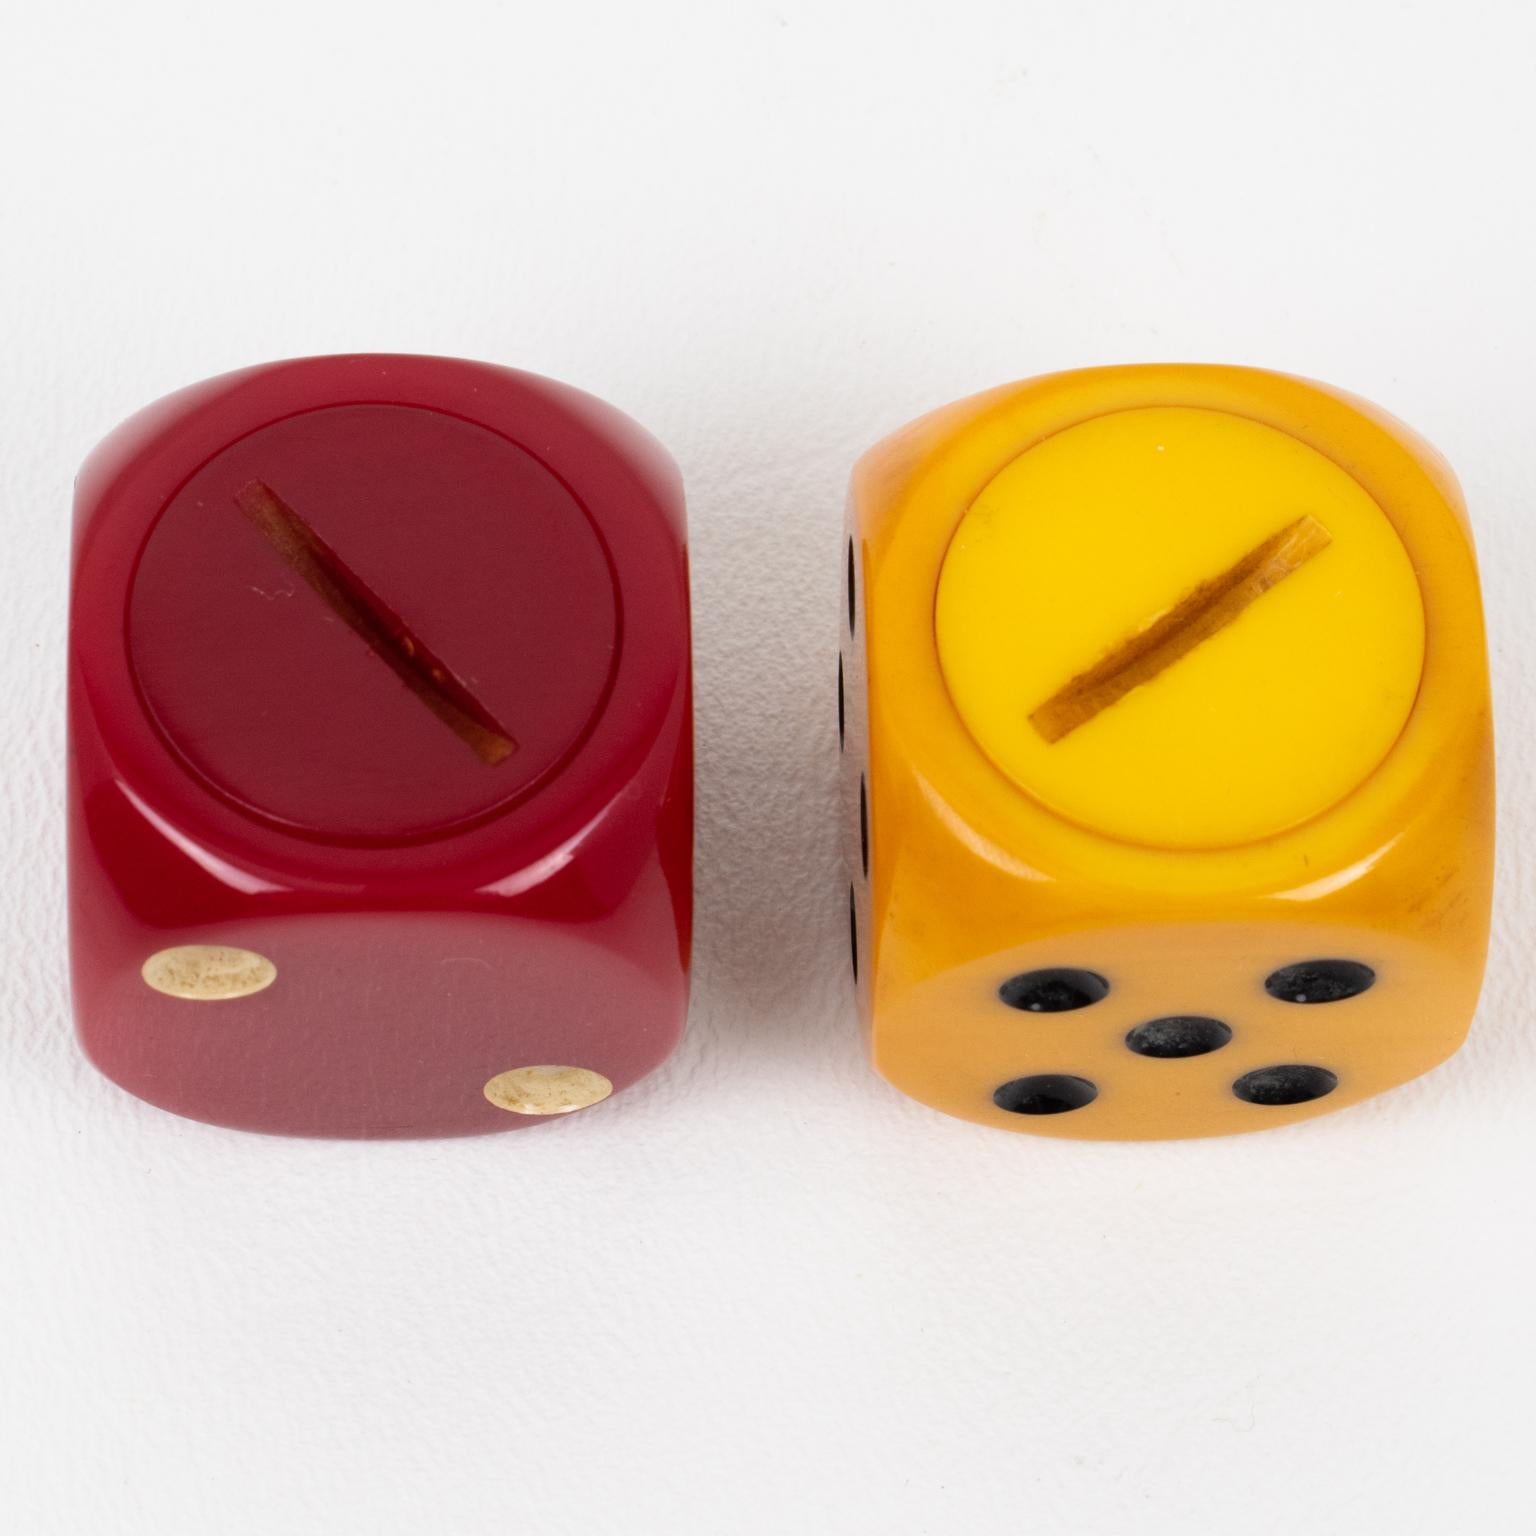 Mid-20th Century Art Deco Red, Yellow Bakelite Dice-Shaped Condiment Salt and Pepper Shakers Set For Sale